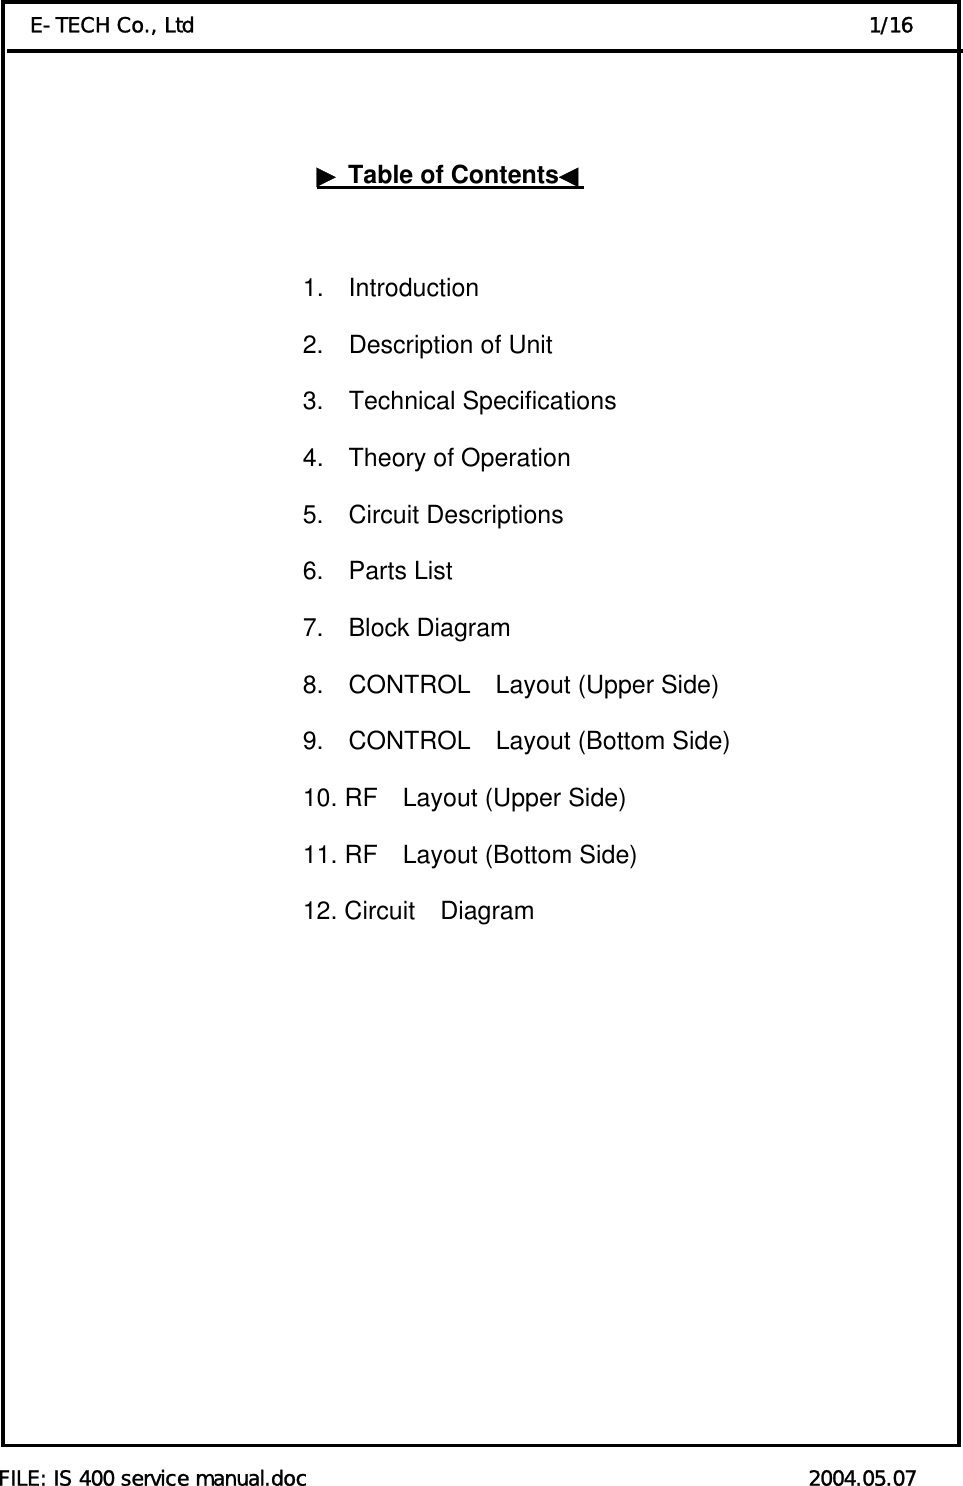  FILE: IS 400 service manual.doc                                                 2004.05.07 E-TECH Co., Ltd                                                                  1/16    ▶Table of Contents◀                            1.  Introduction                                          2.  Description of Unit                                          3.  Technical Specifications                                           4.  Theory of Operation 5.  Circuit Descriptions    6.  Parts List 7.  Block Diagram 8.  CONTROL  Layout (Upper Side) 9.  CONTROL  Layout (Bottom Side) 10. RF    Layout (Upper Side) 11. RF    Layout (Bottom Side) 12. Circuit  Diagram                                   